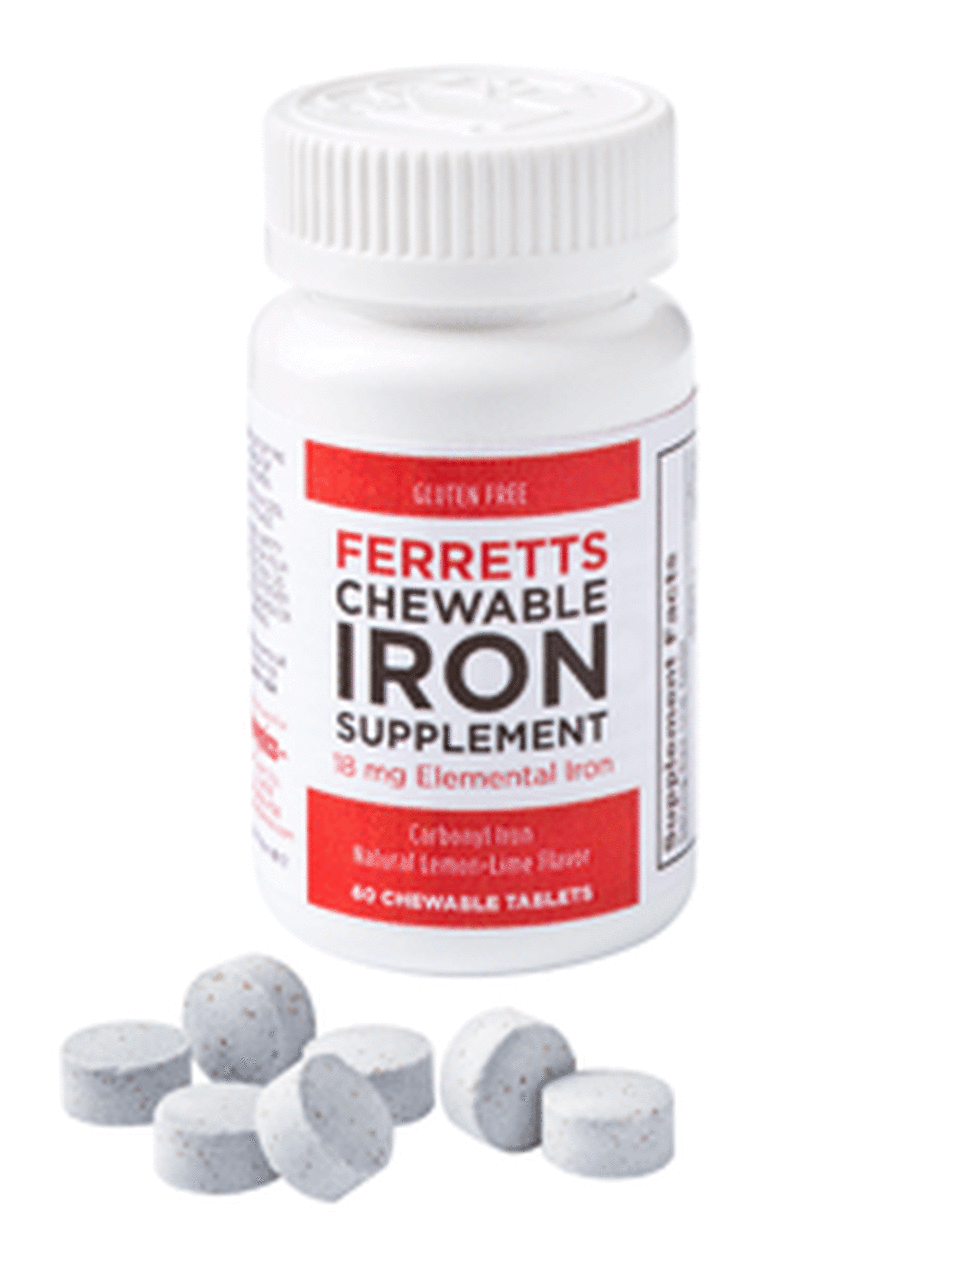 Ferretts Chewable Iron Supplement (18mg) - 60 Tablets